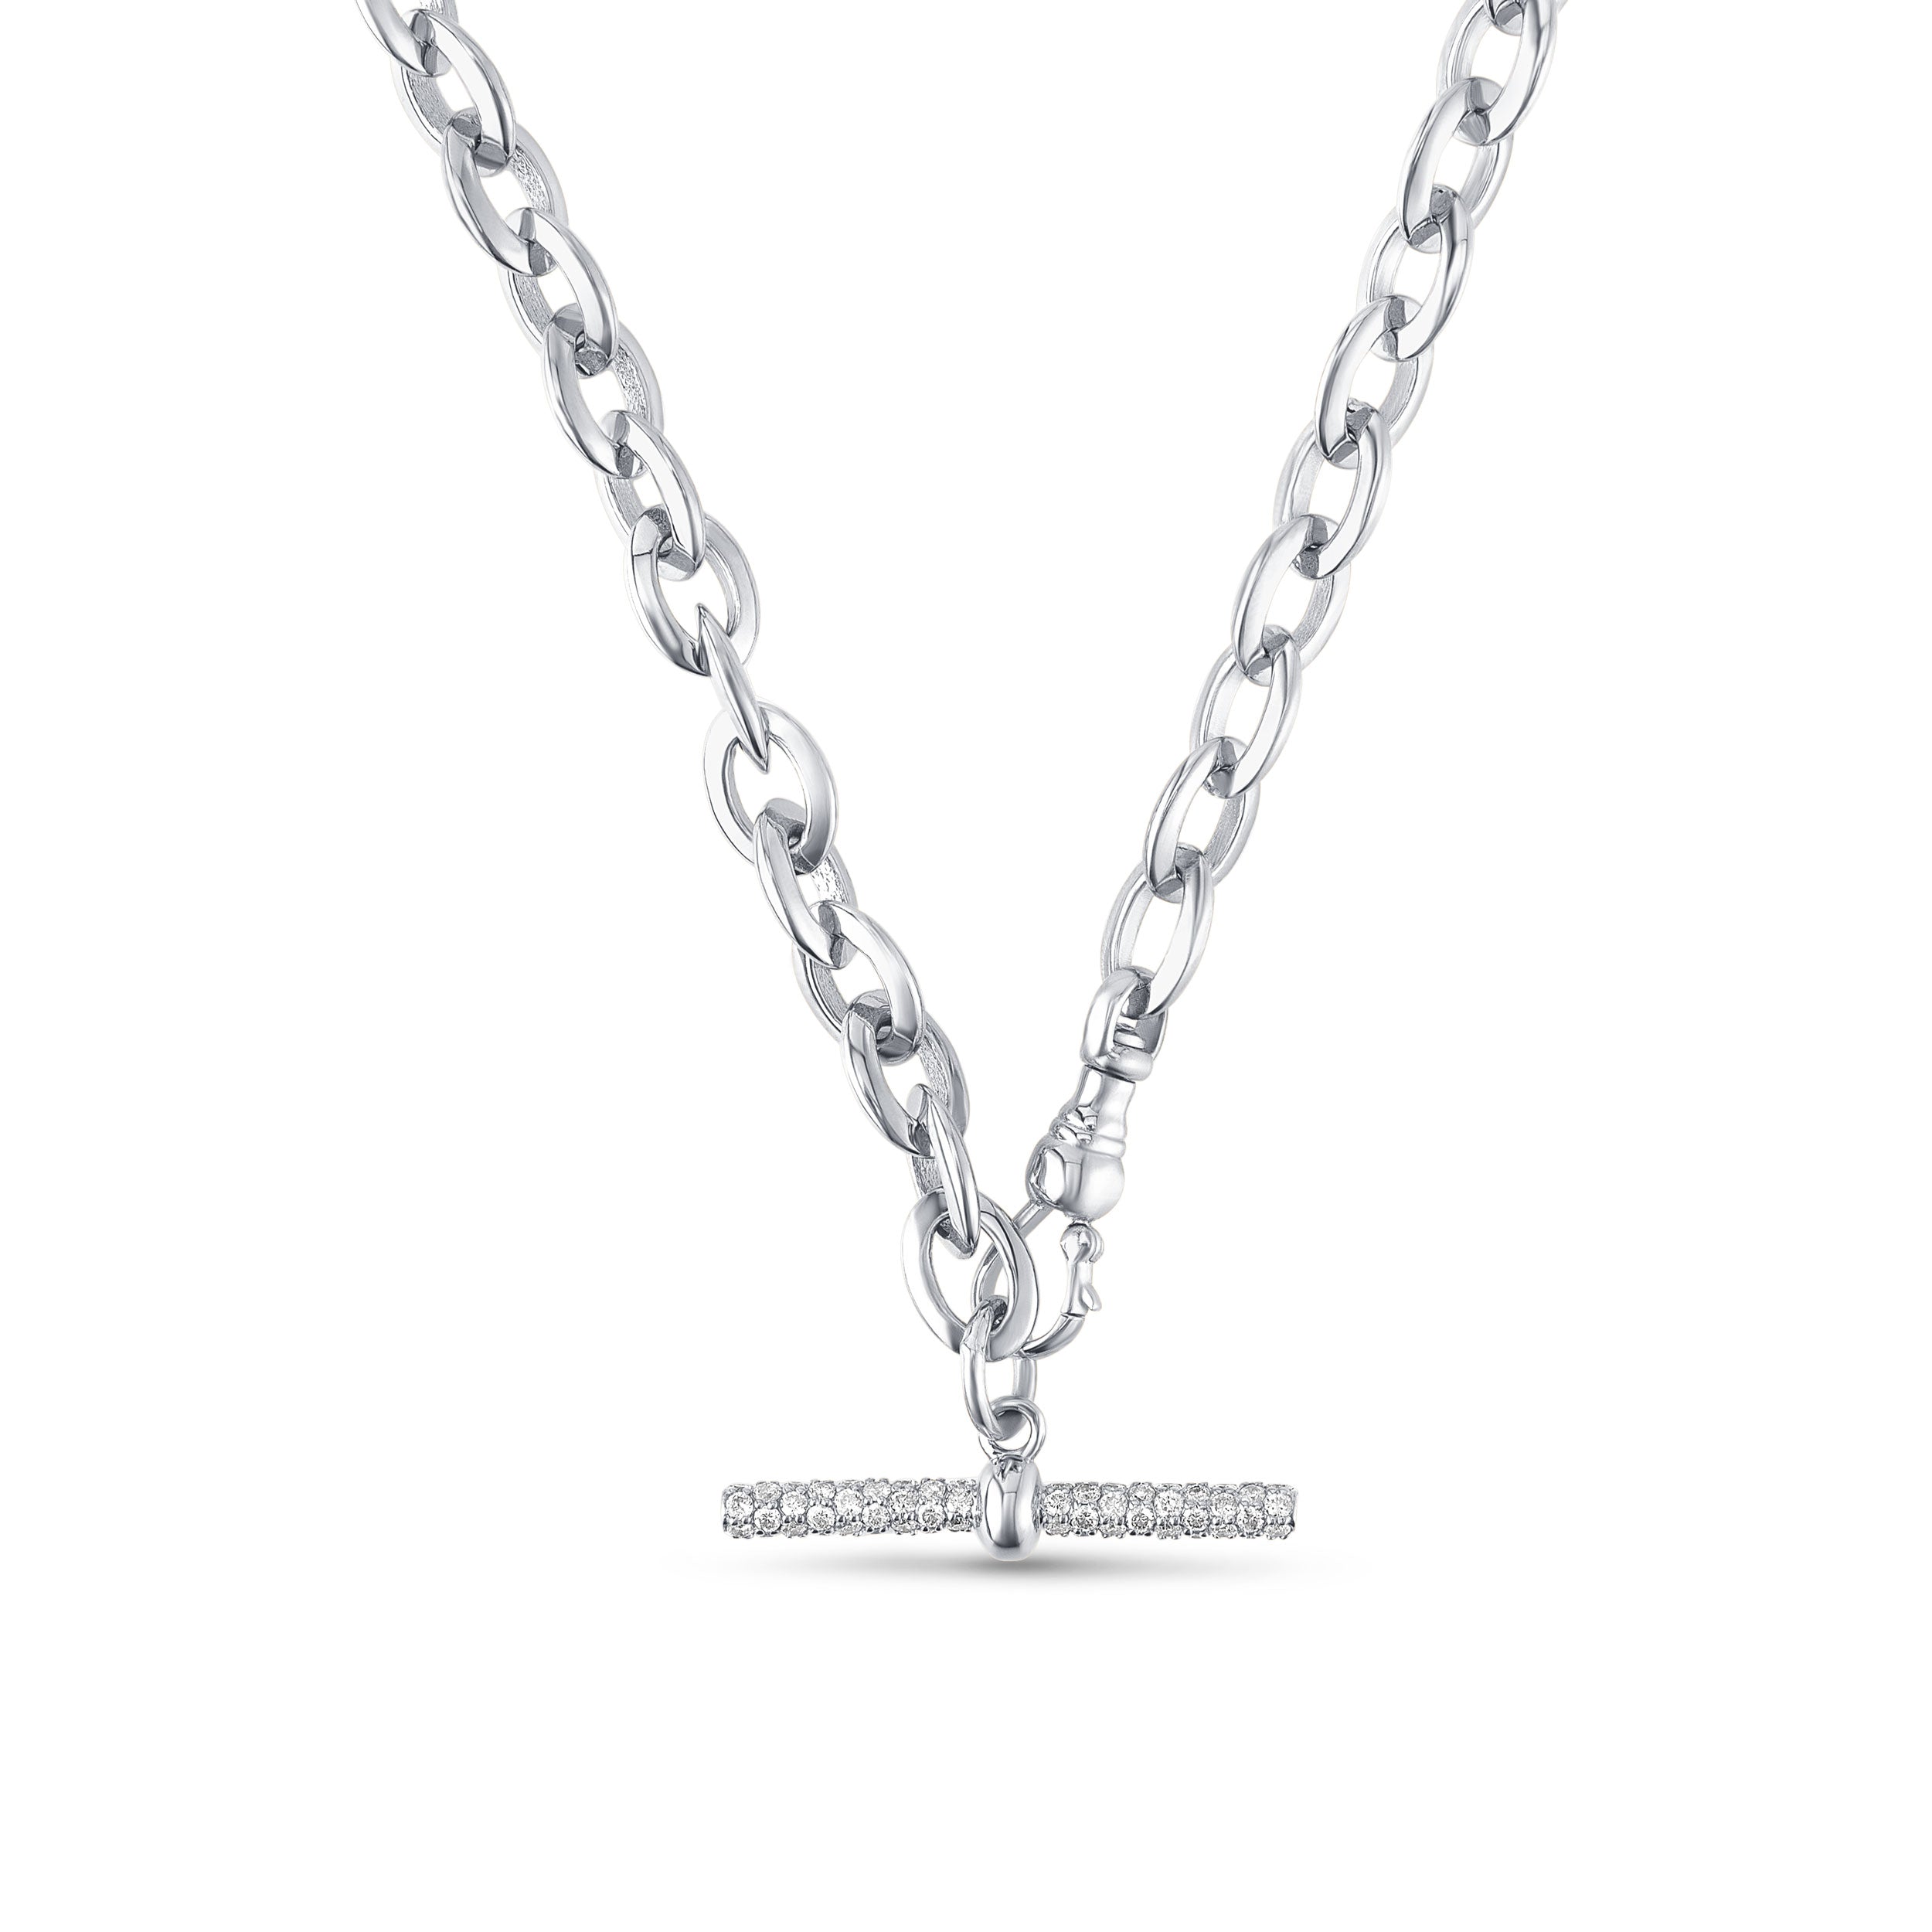 Pantheon Necklace in White Gold